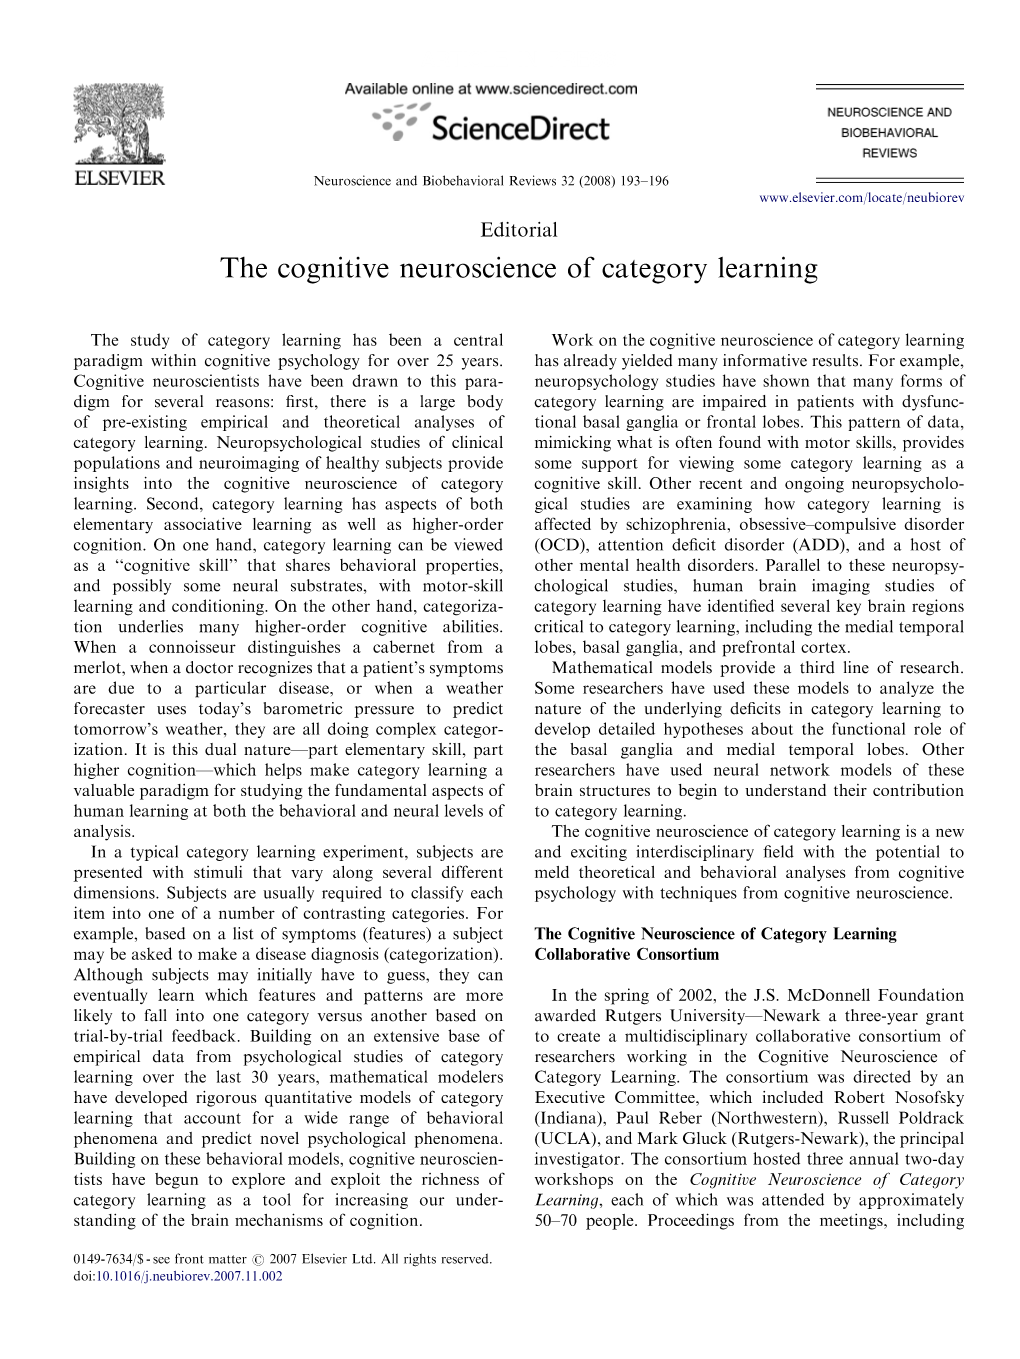 The Cognitive Neuroscience of Category Learning